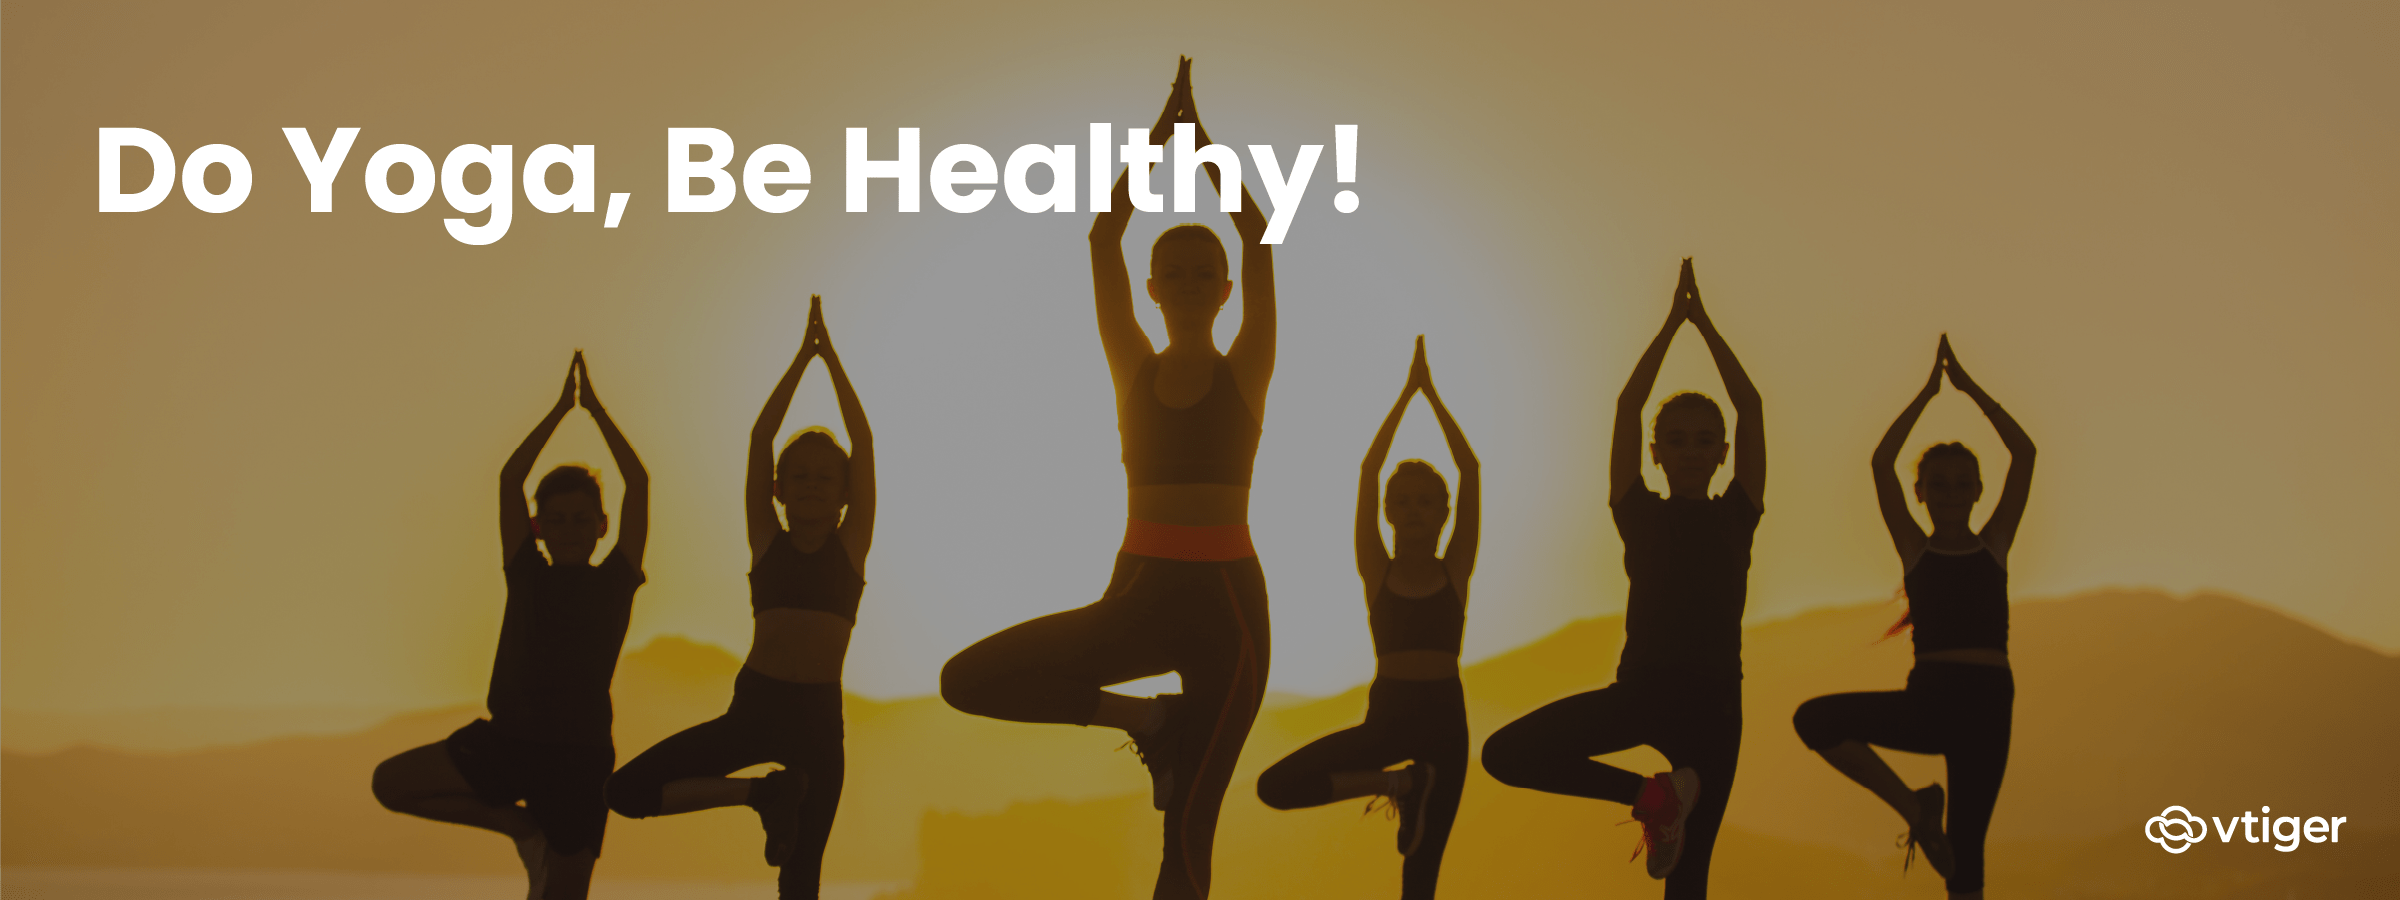 How Yoga Can Help You Live a Healthier Lifestyle